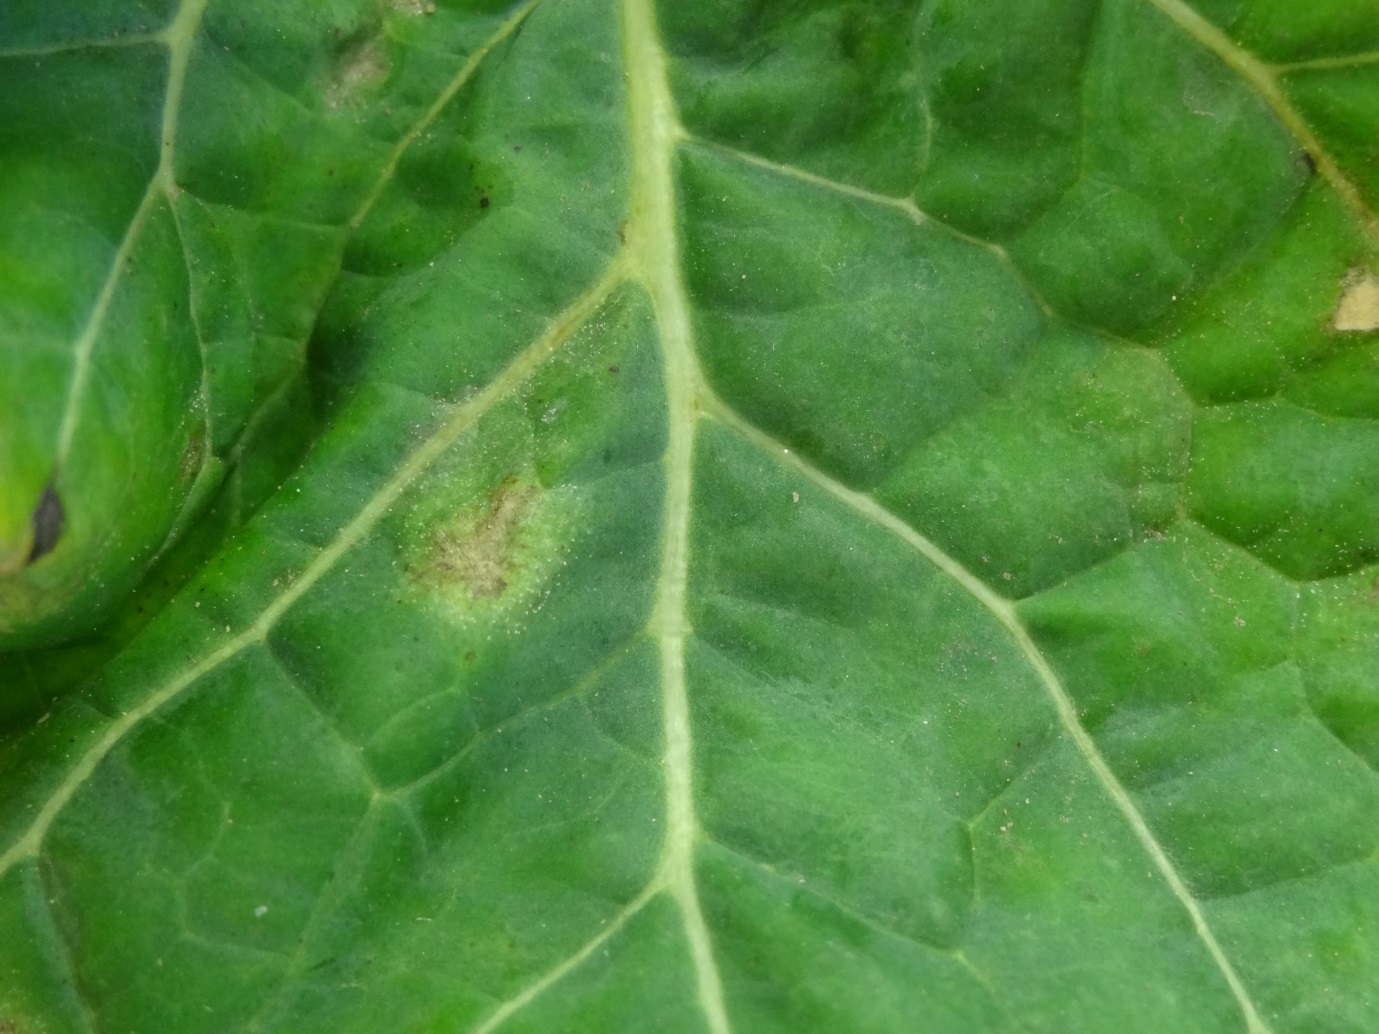 Light leaf spot after 48 hours incubation which brings out the classic ‘salt-like’ white spores